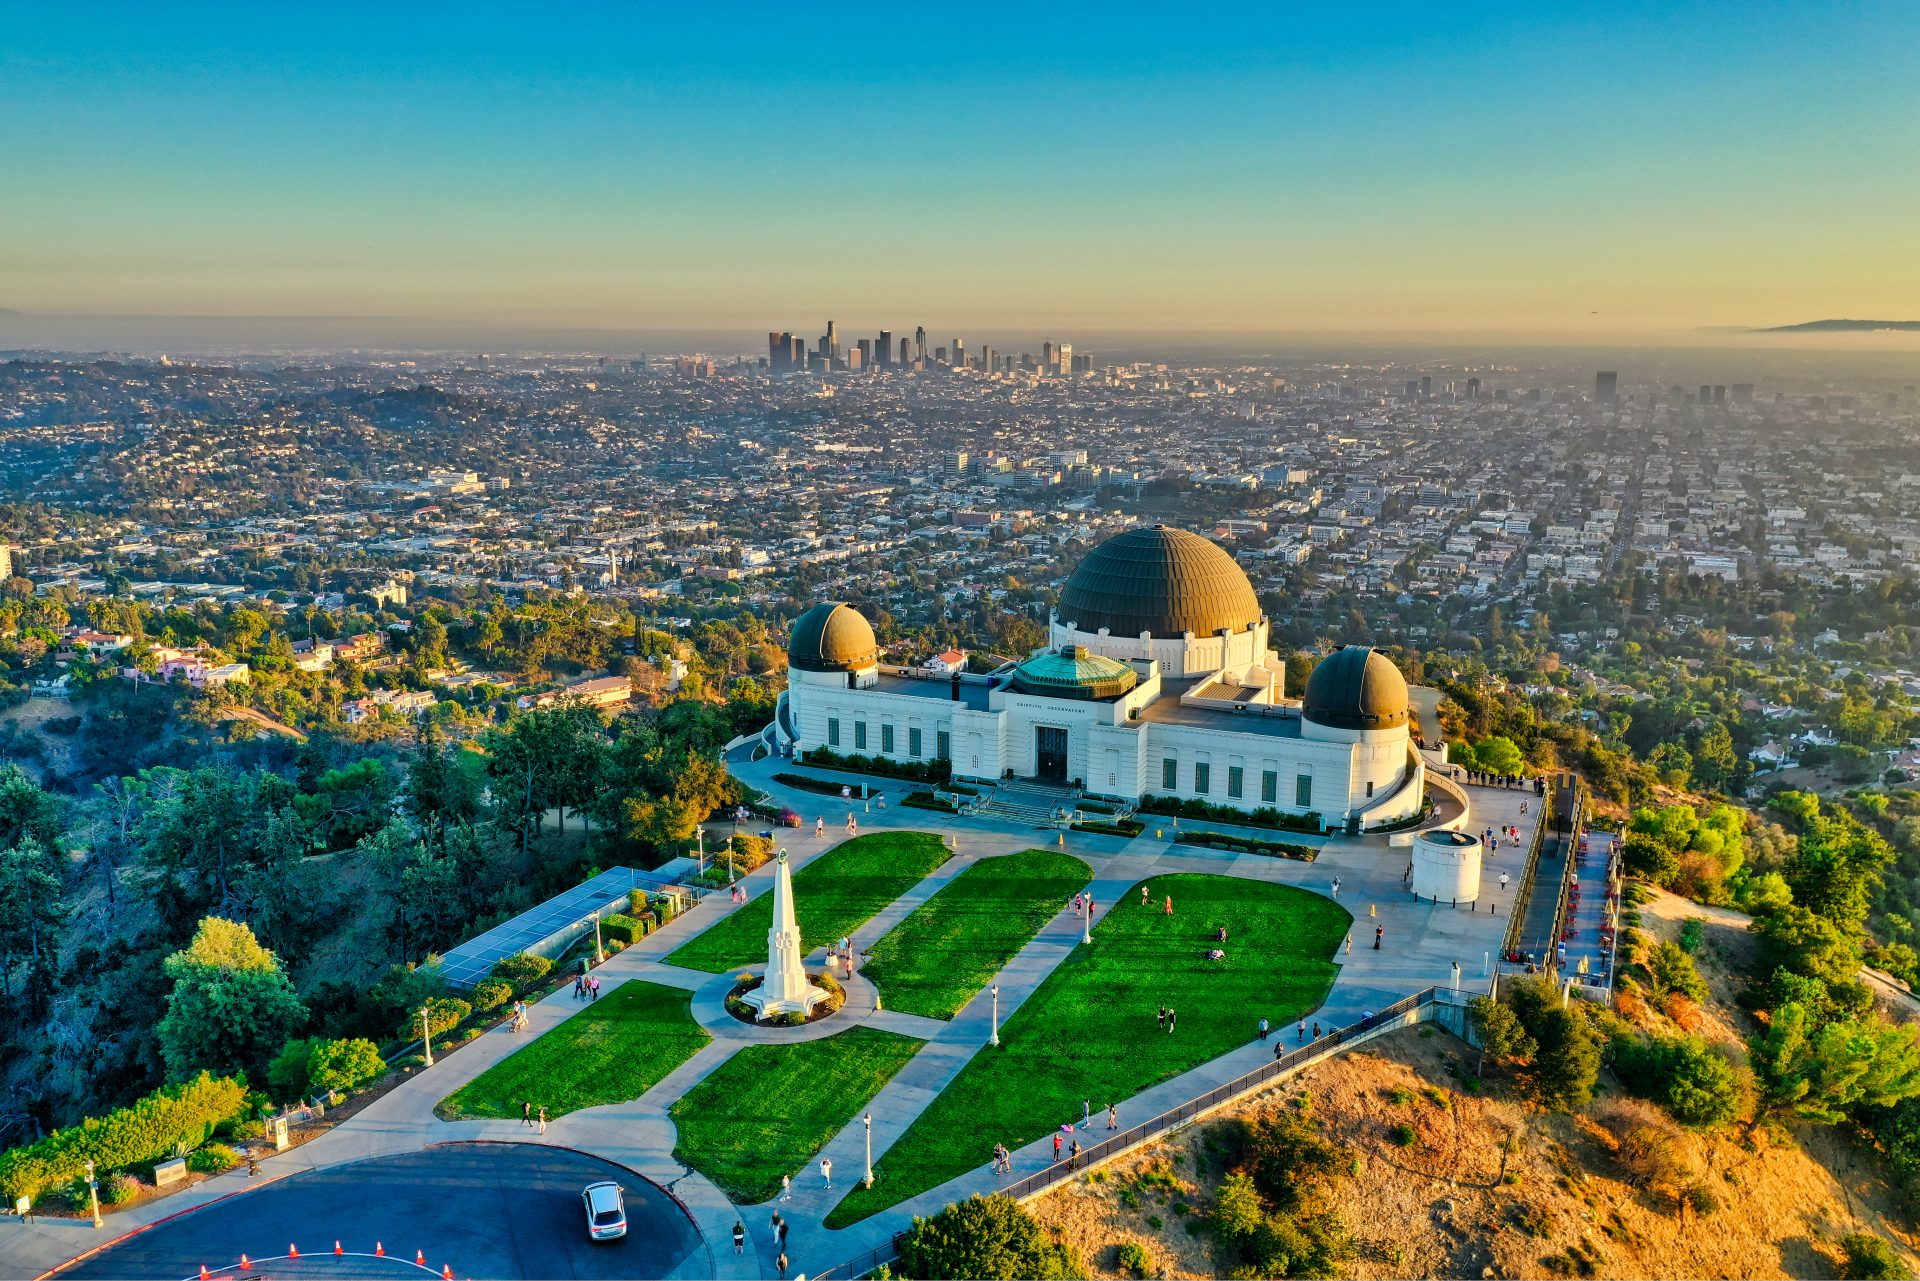 griffith observatory tours